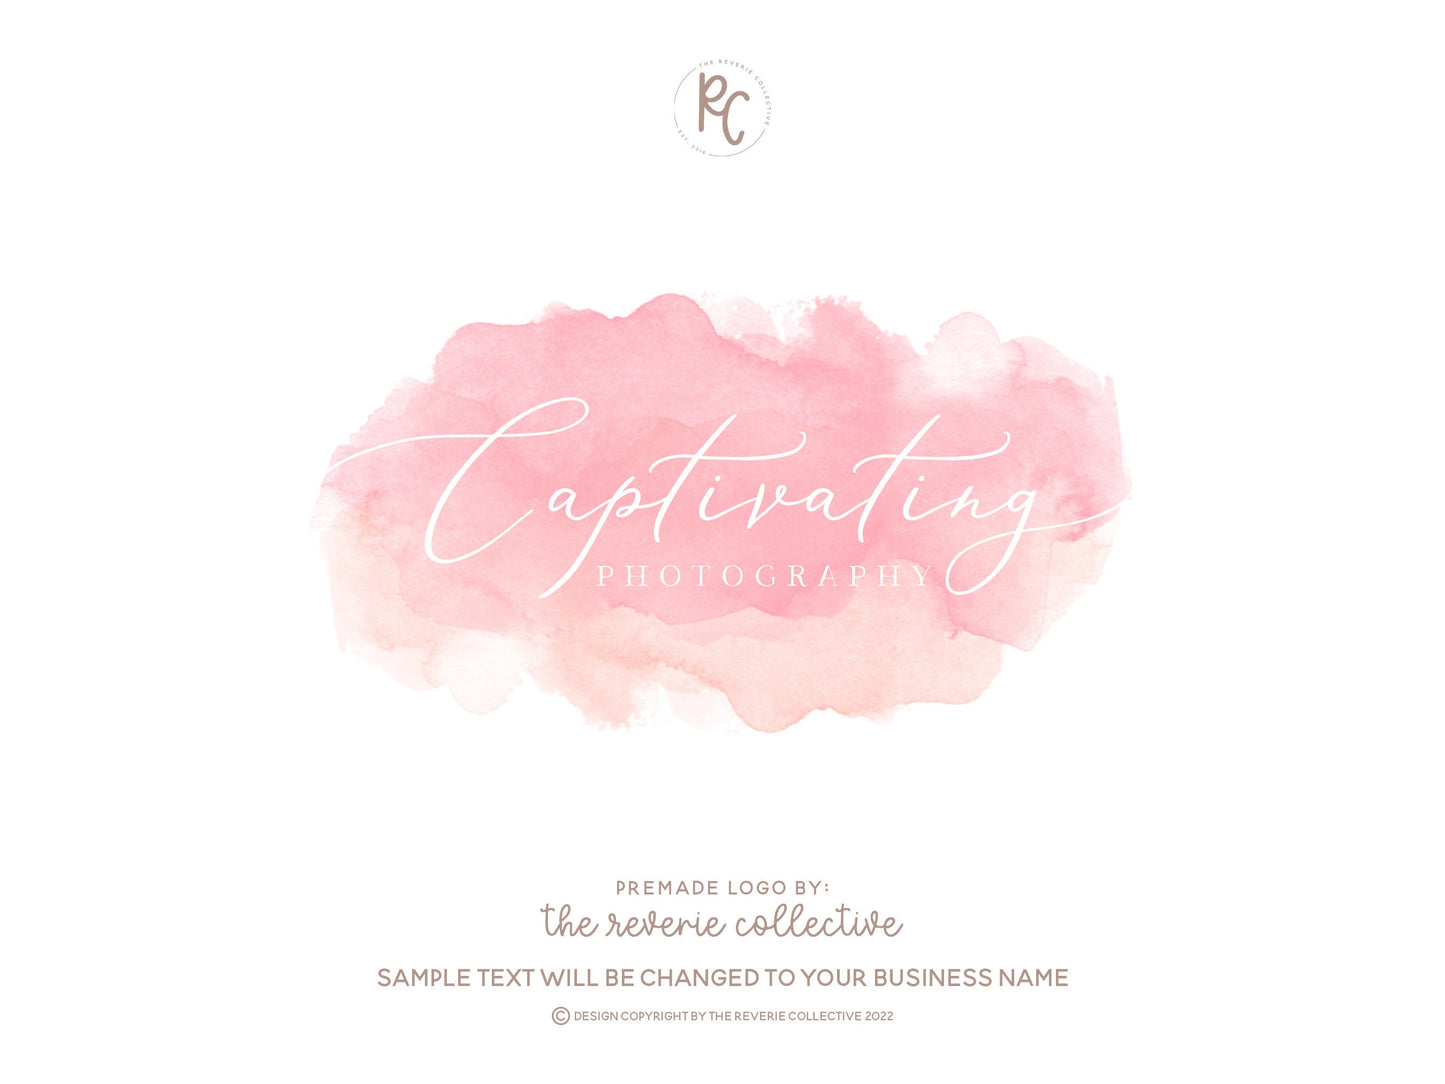 Captivating | Premade Logo Design | Watercolor, Pastel, Calligraphy, Dreamy, Airy